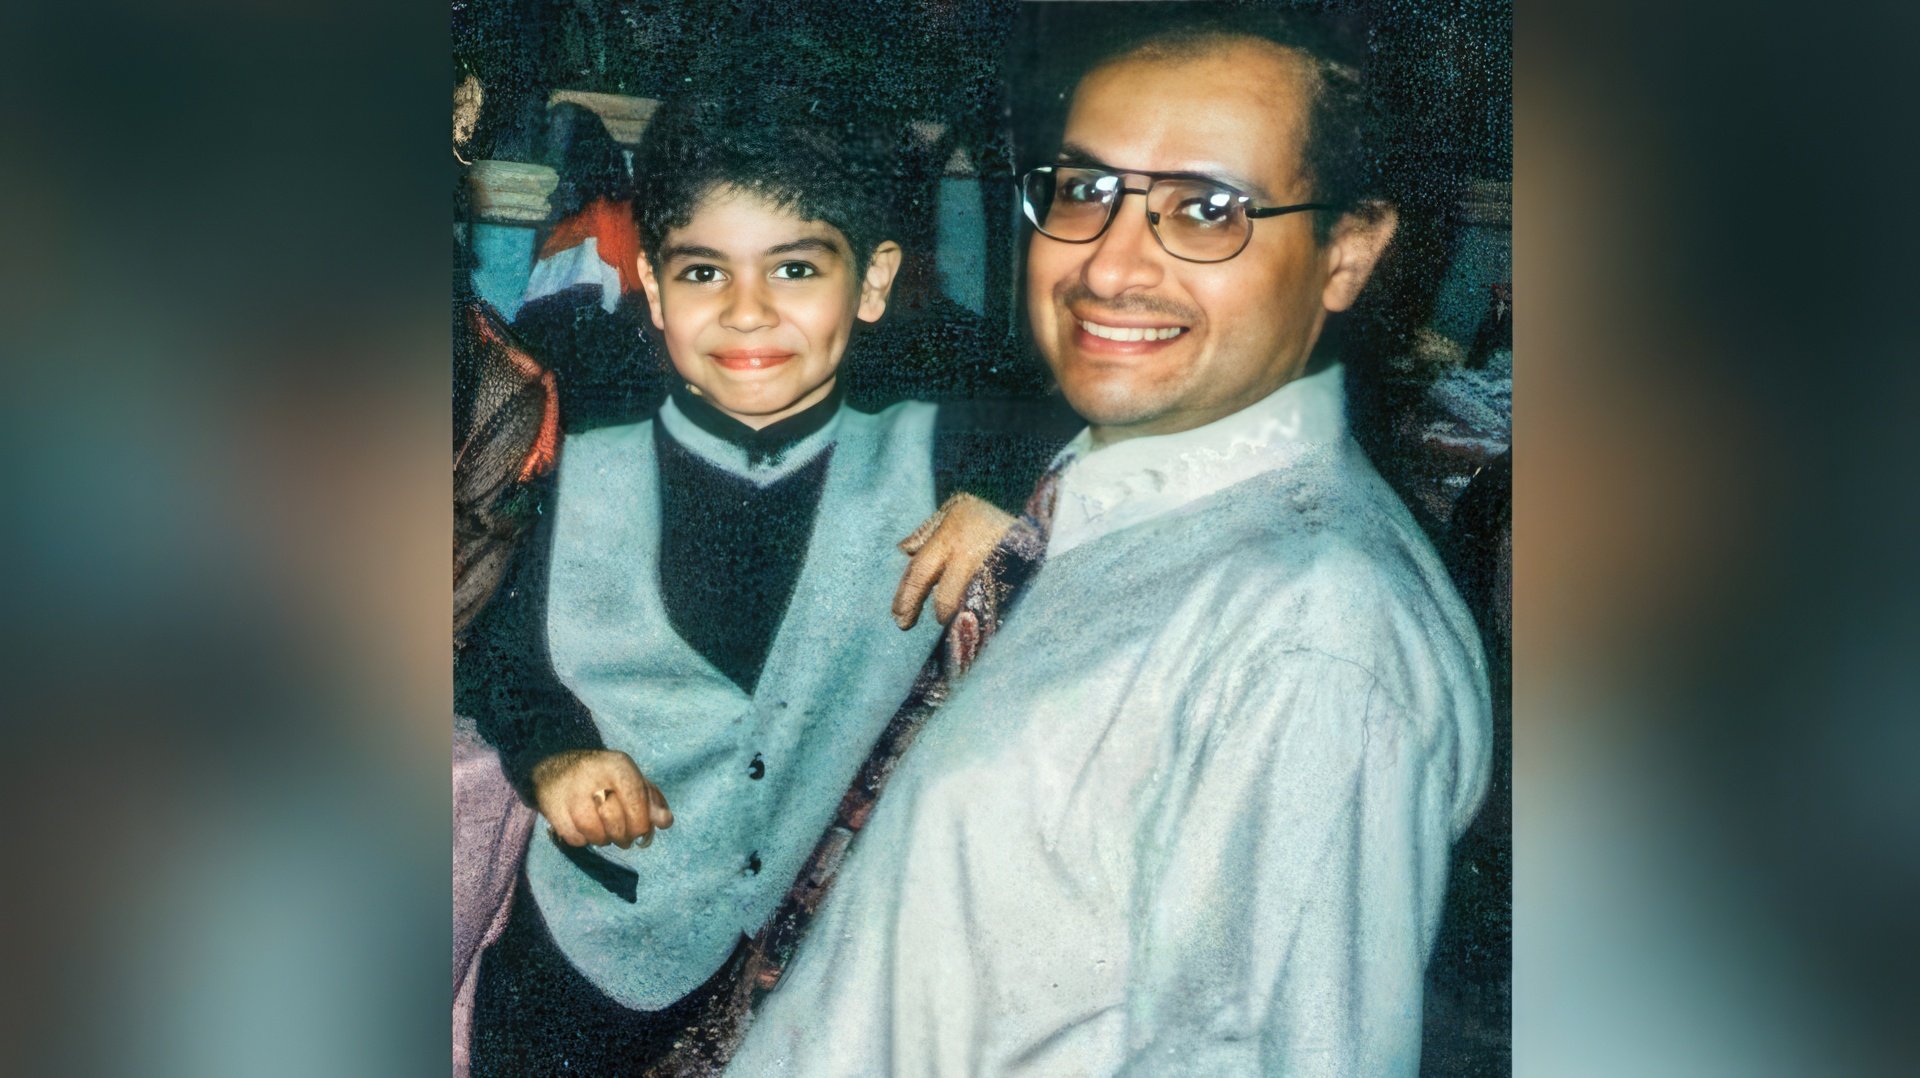 Mena Massoud with his father in childhood